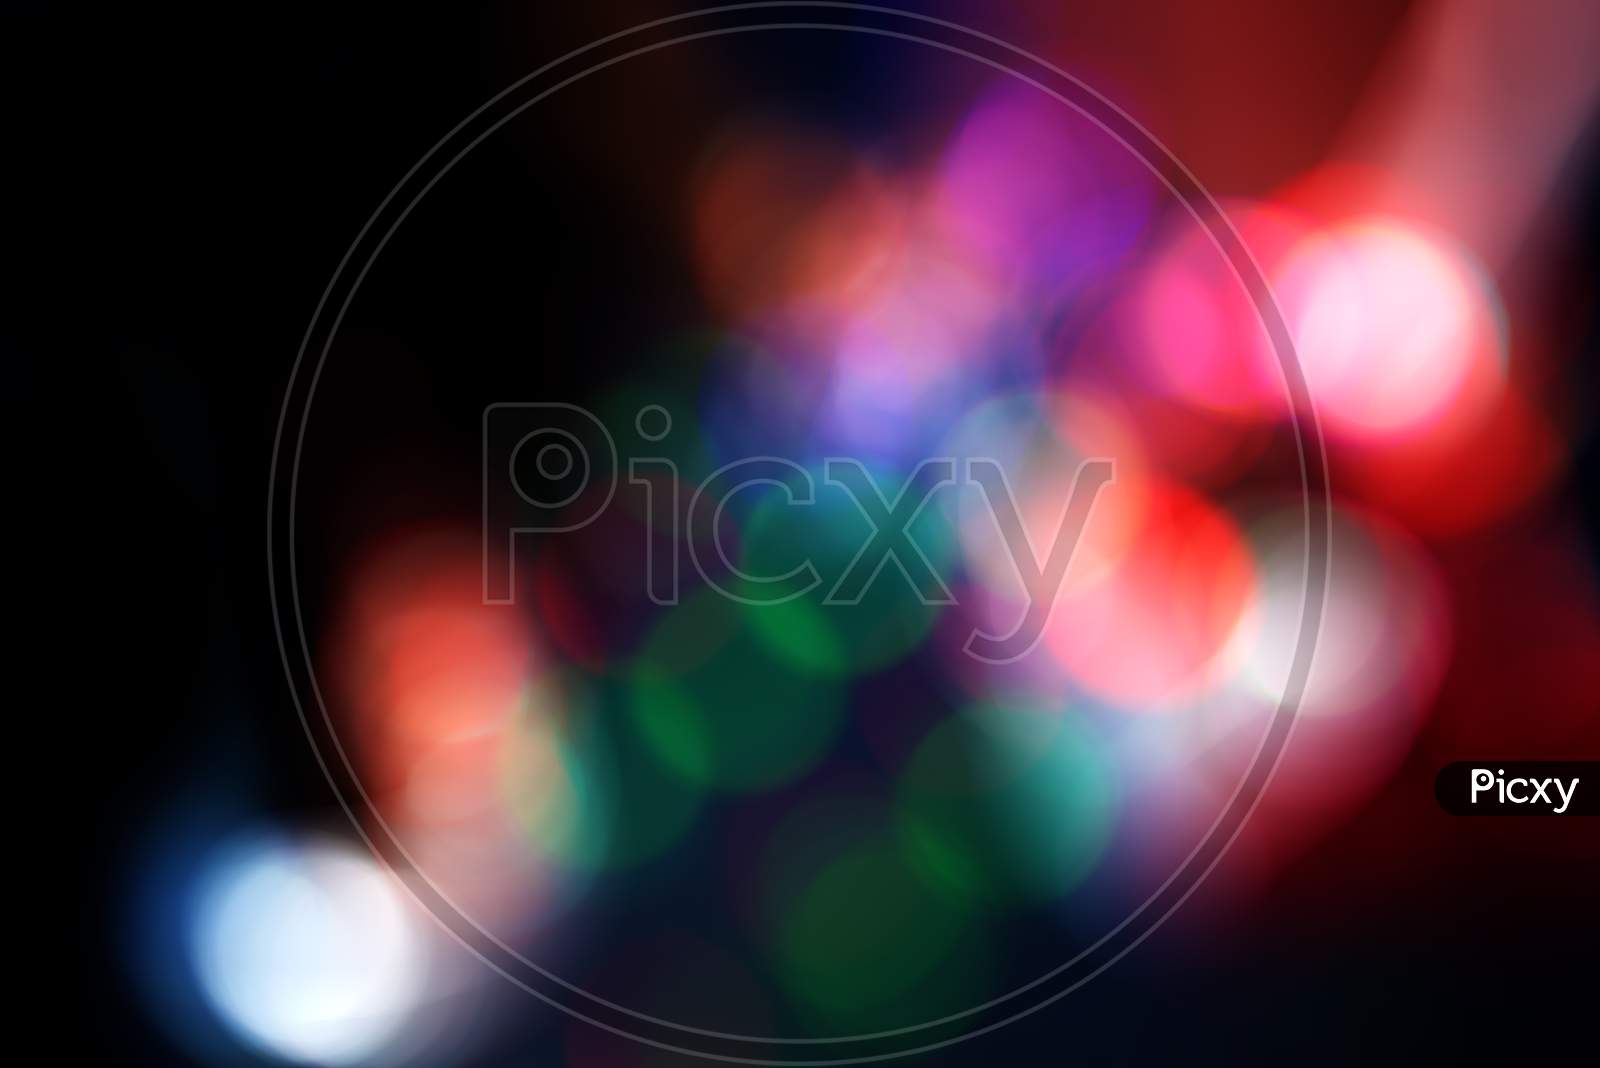 Blur Abstract Bokeh Background For Overlay, Colorful Defocused Light